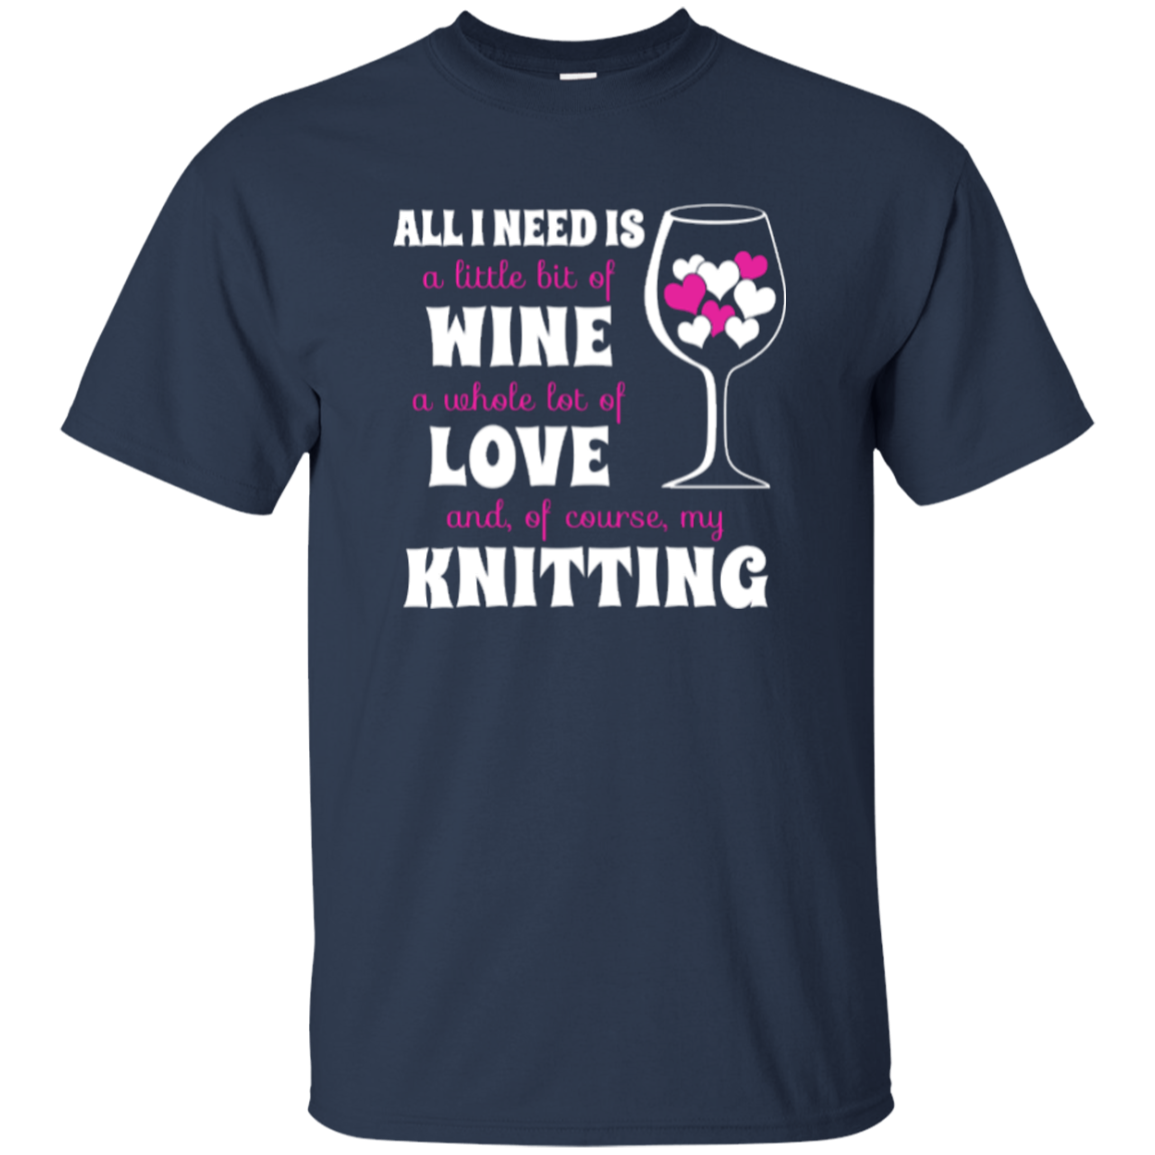 All I Need is Wine-Love-Knitting Custom Ultra Cotton T-Shirt - Crafter4Life - 11